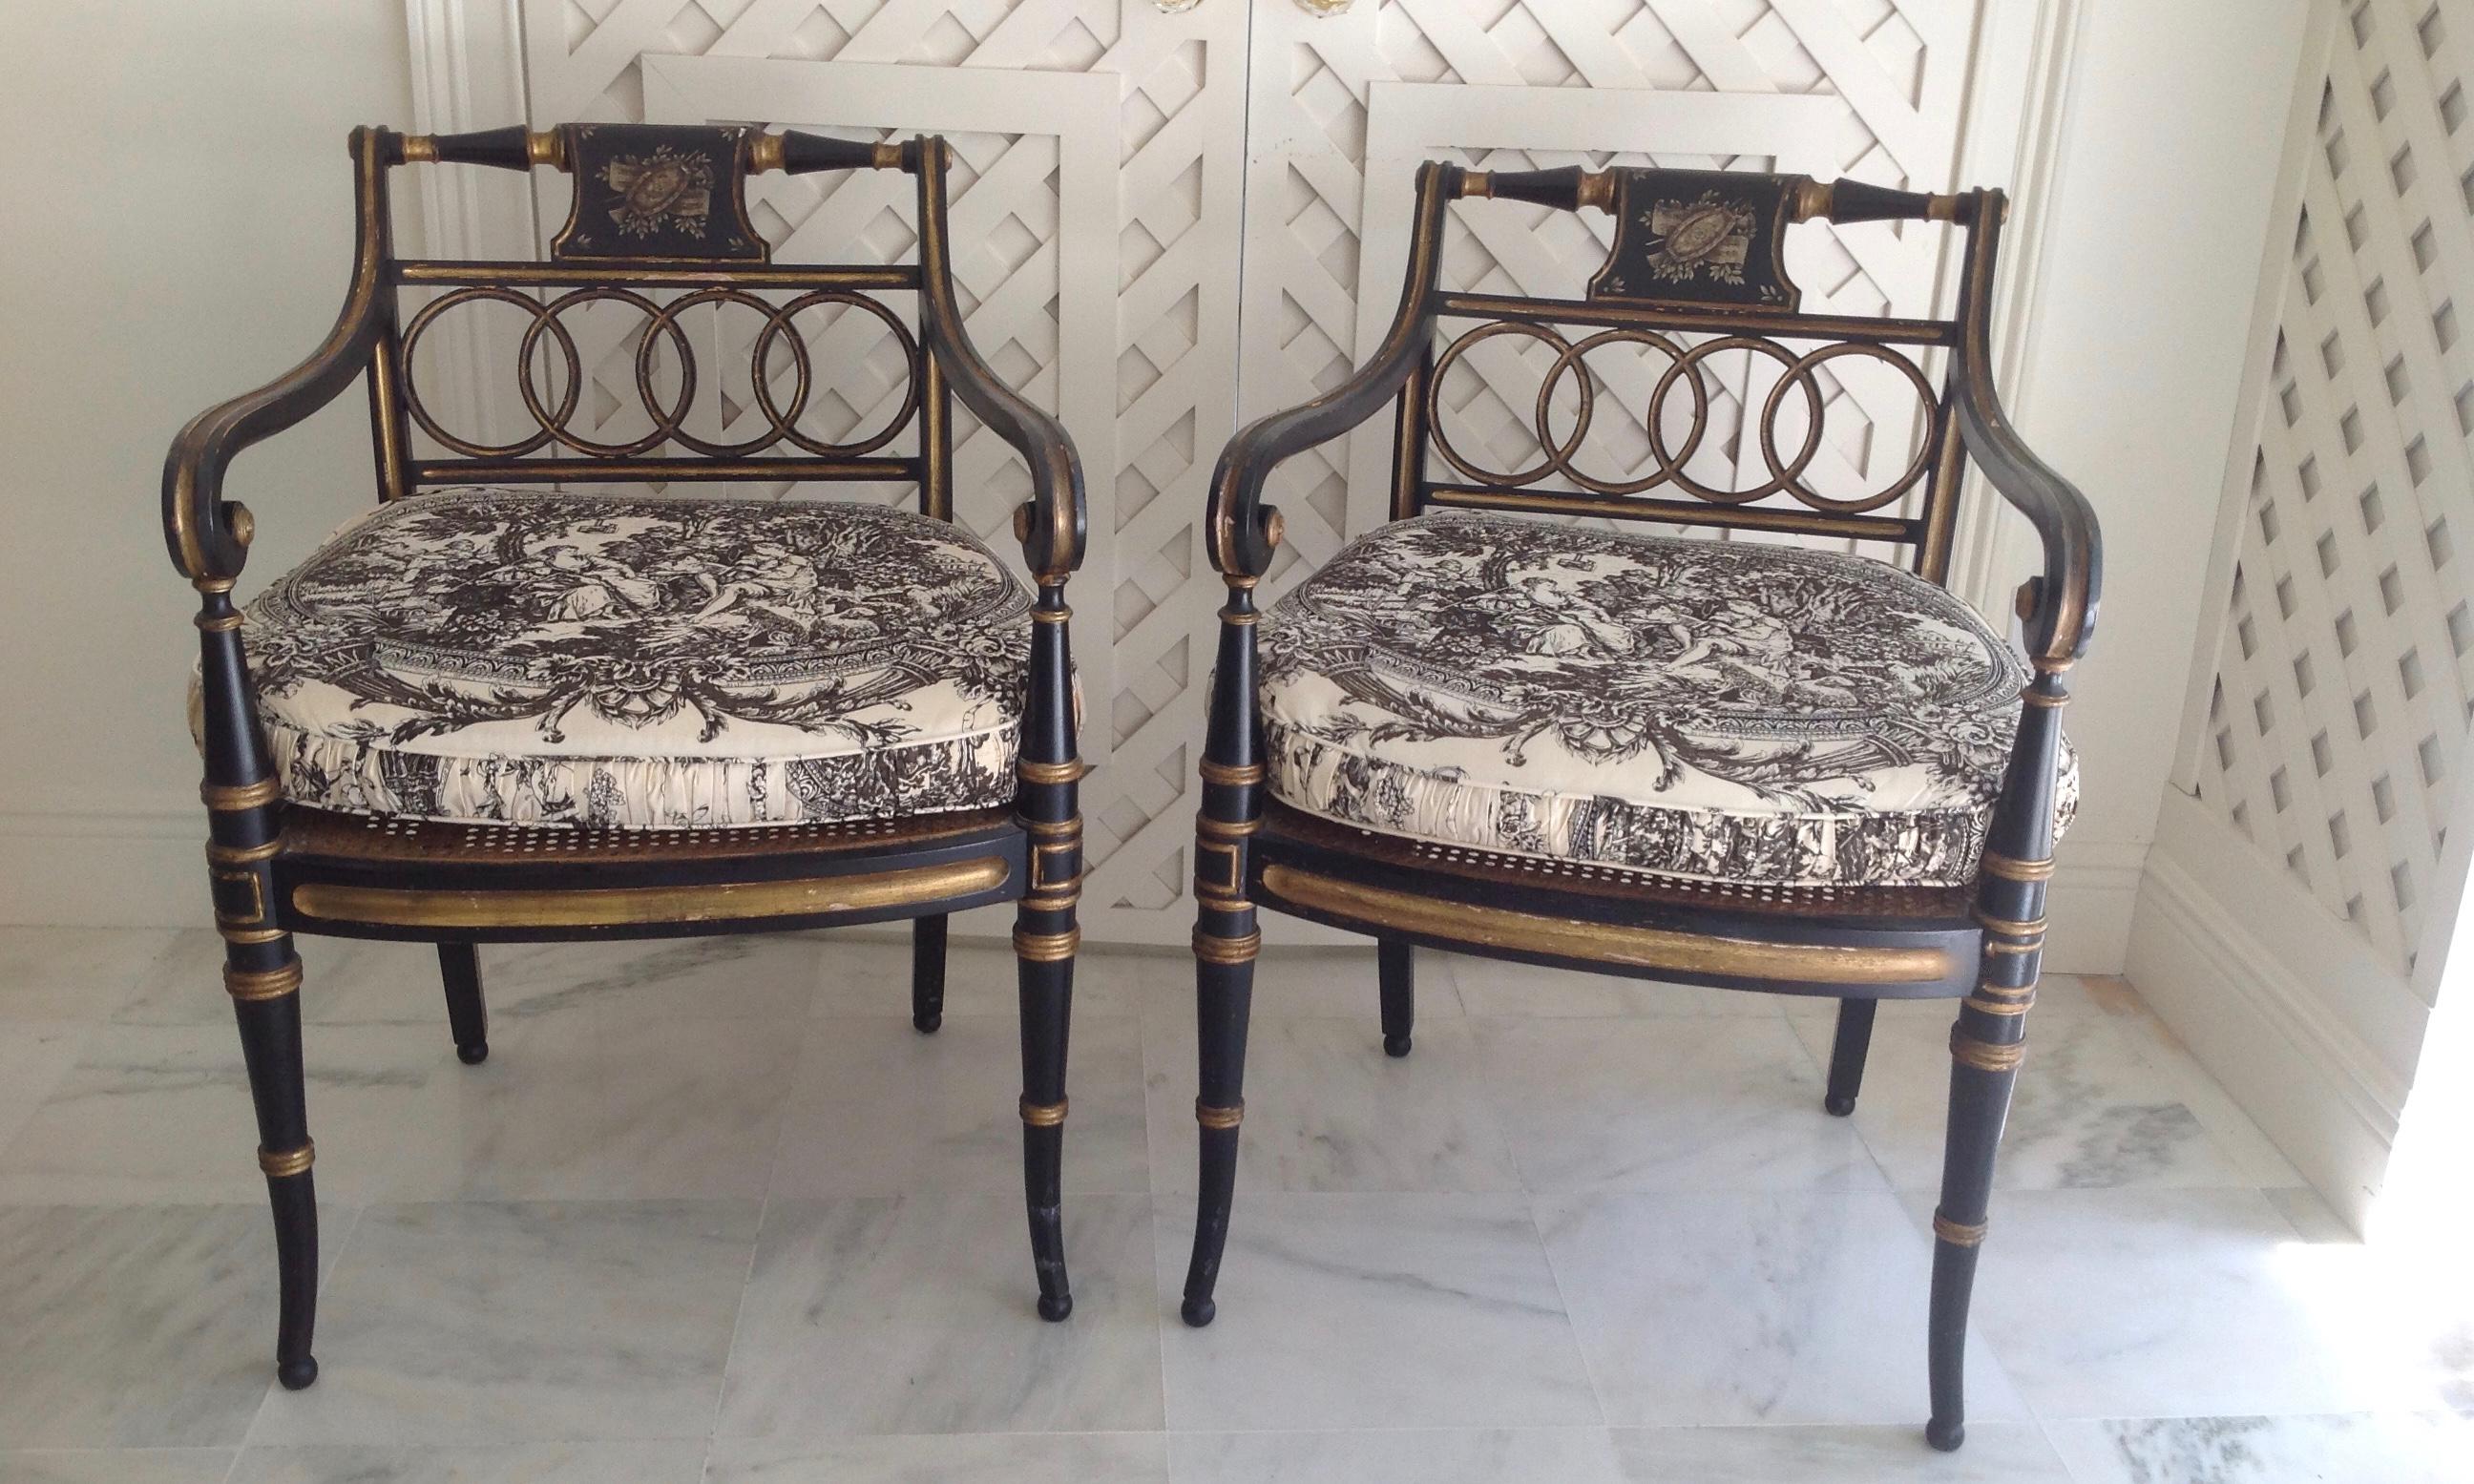 Classic black with gilt appointments. The chairs are fashioned with caned seats and topped
with loose fitted toile appointed cushions. The cushions are 4